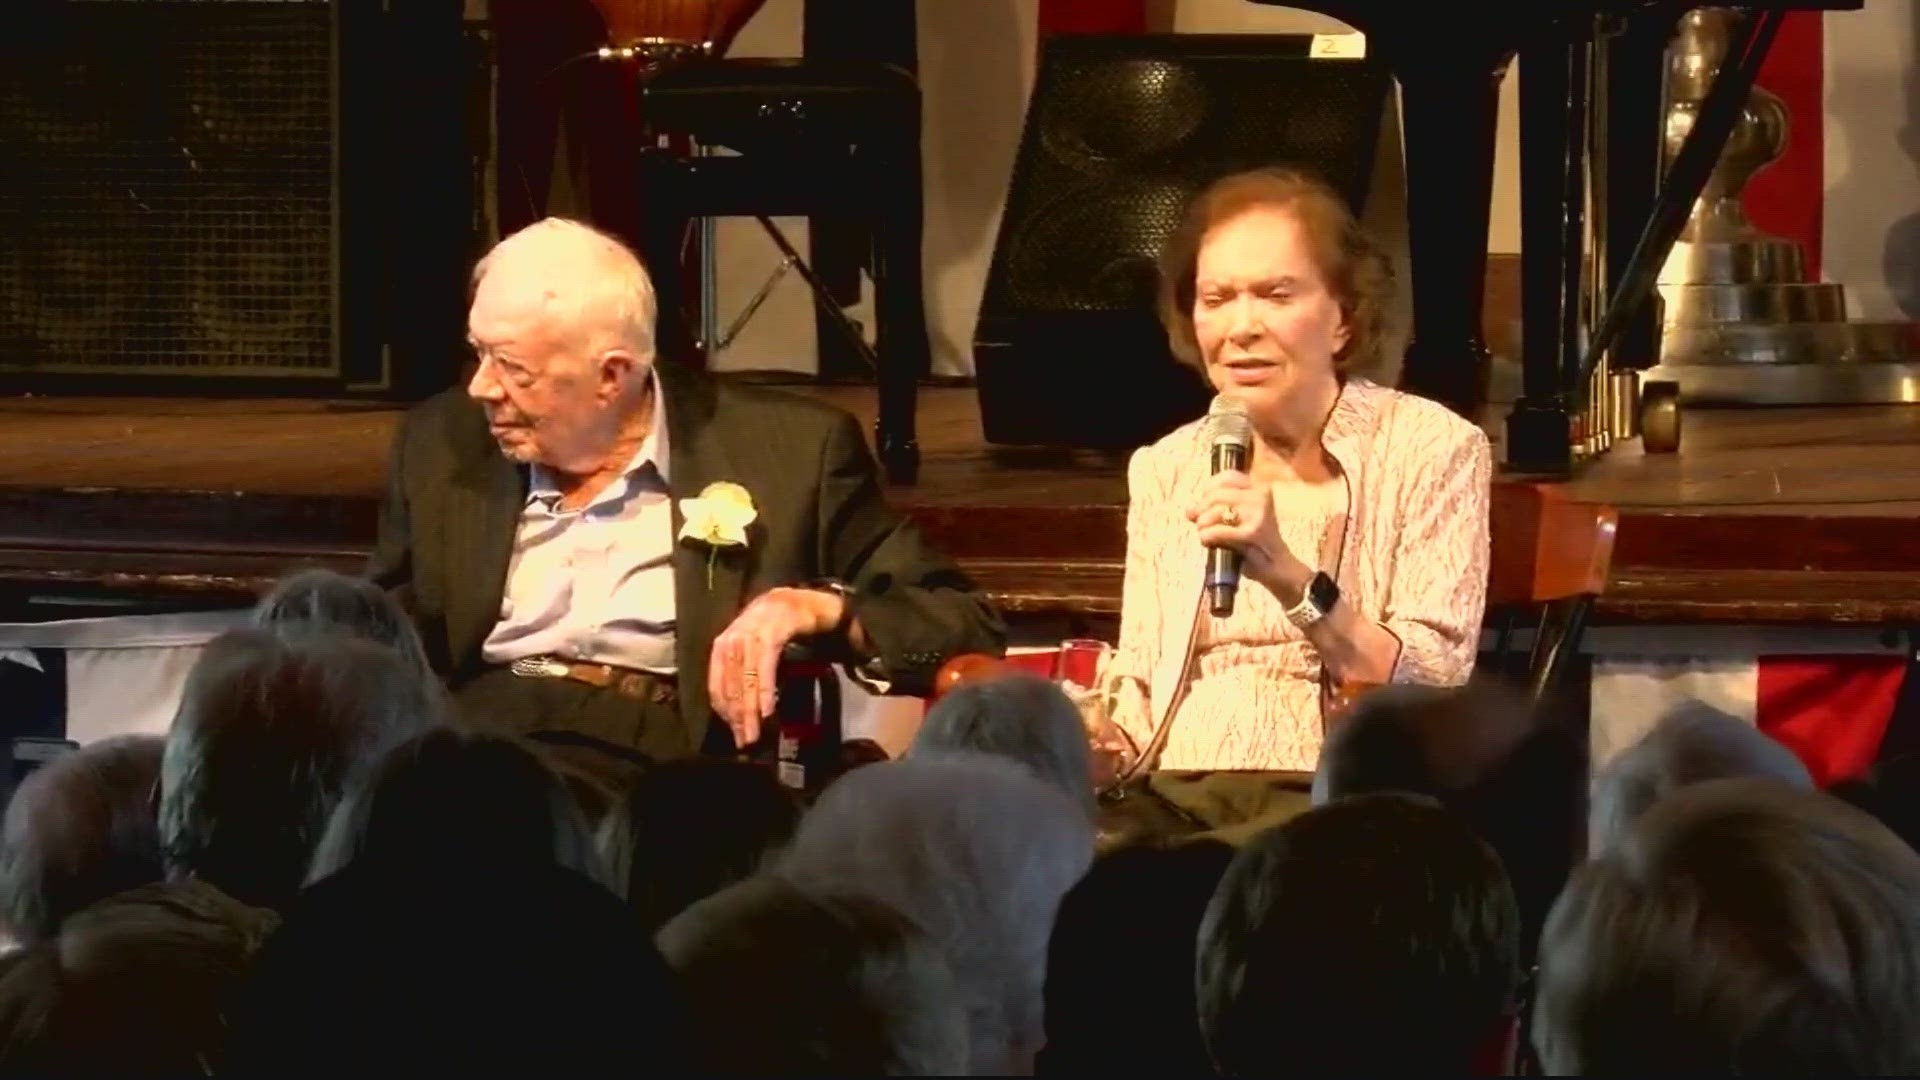 The announcement comes nine months after former president Jimmy Carter entered home hospice care in Plains, Georgia.